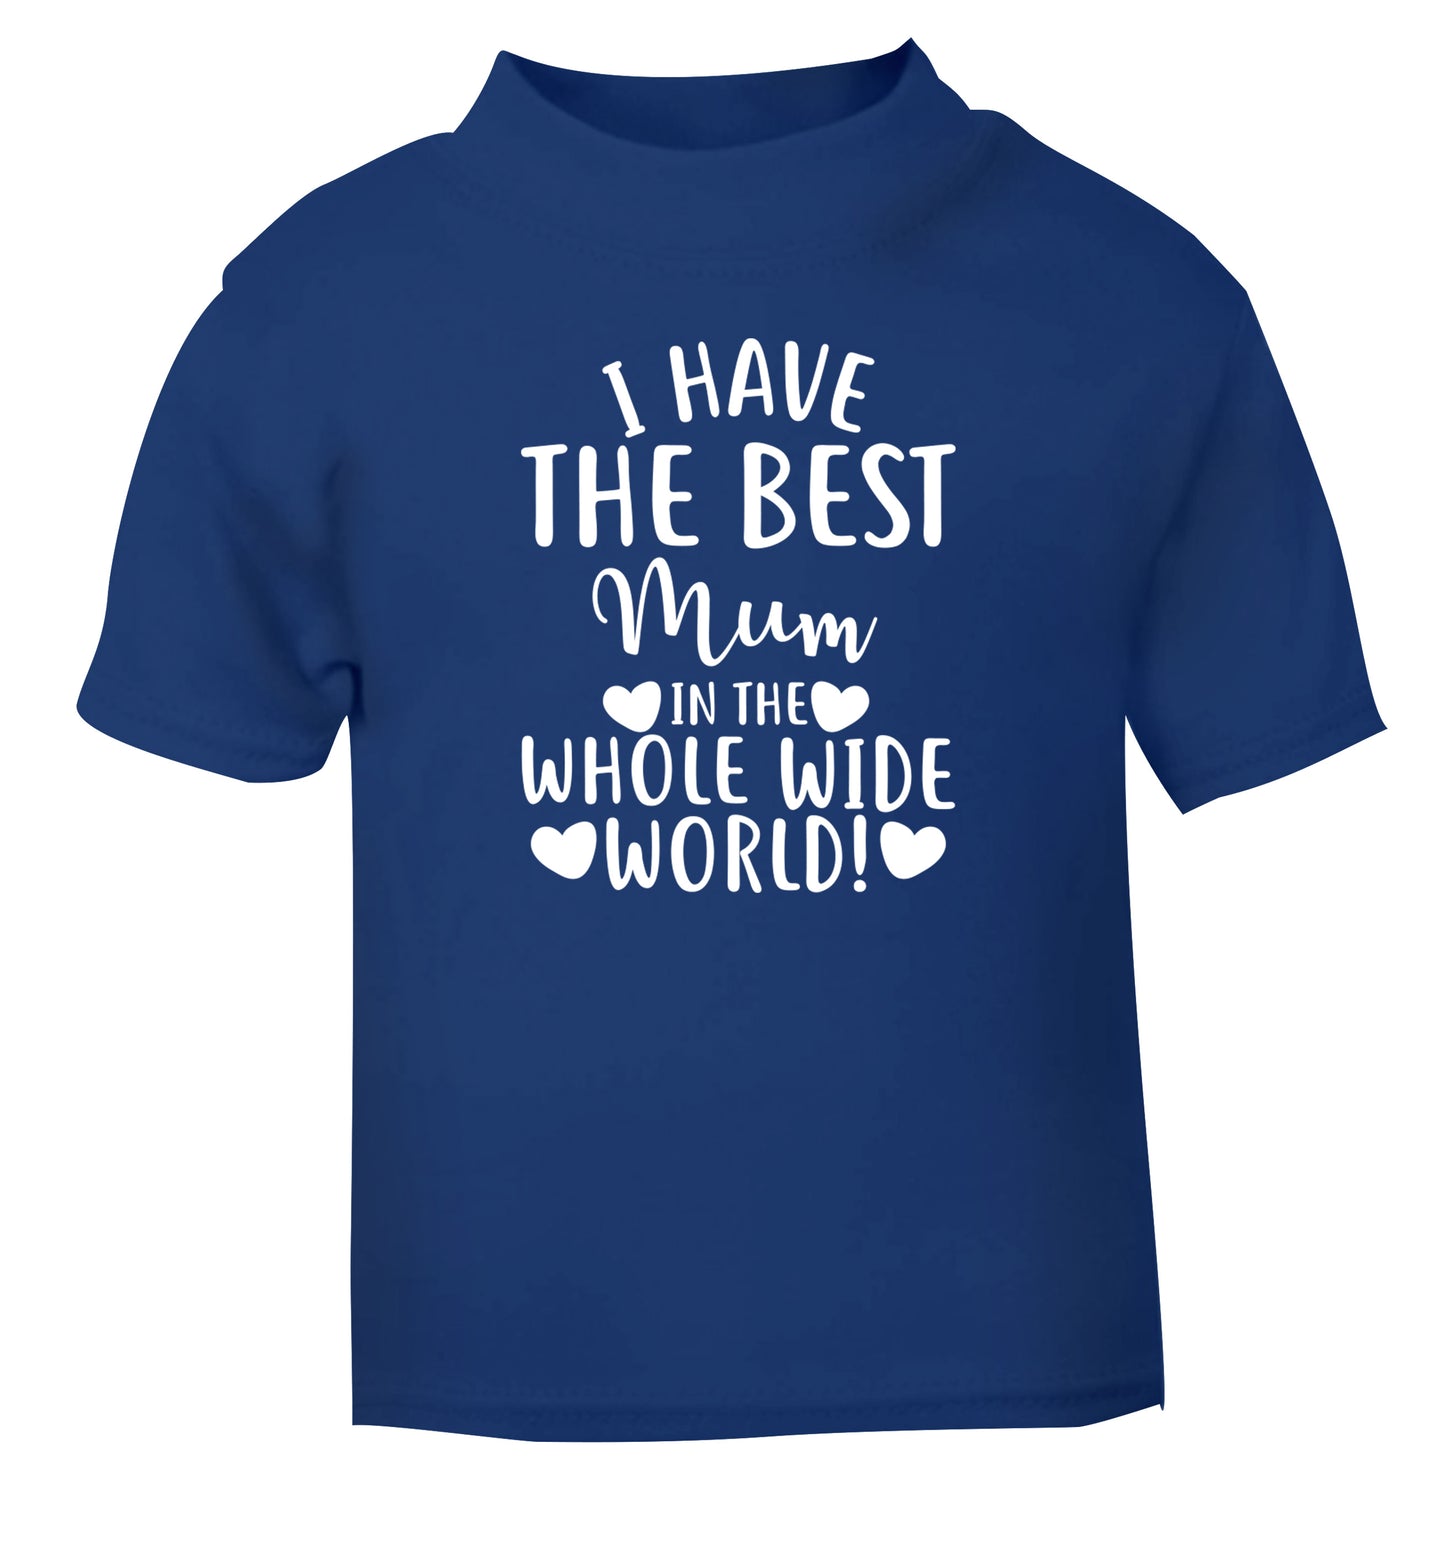 I have the best mum in the whole wide world! blue Baby Toddler Tshirt 2 Years